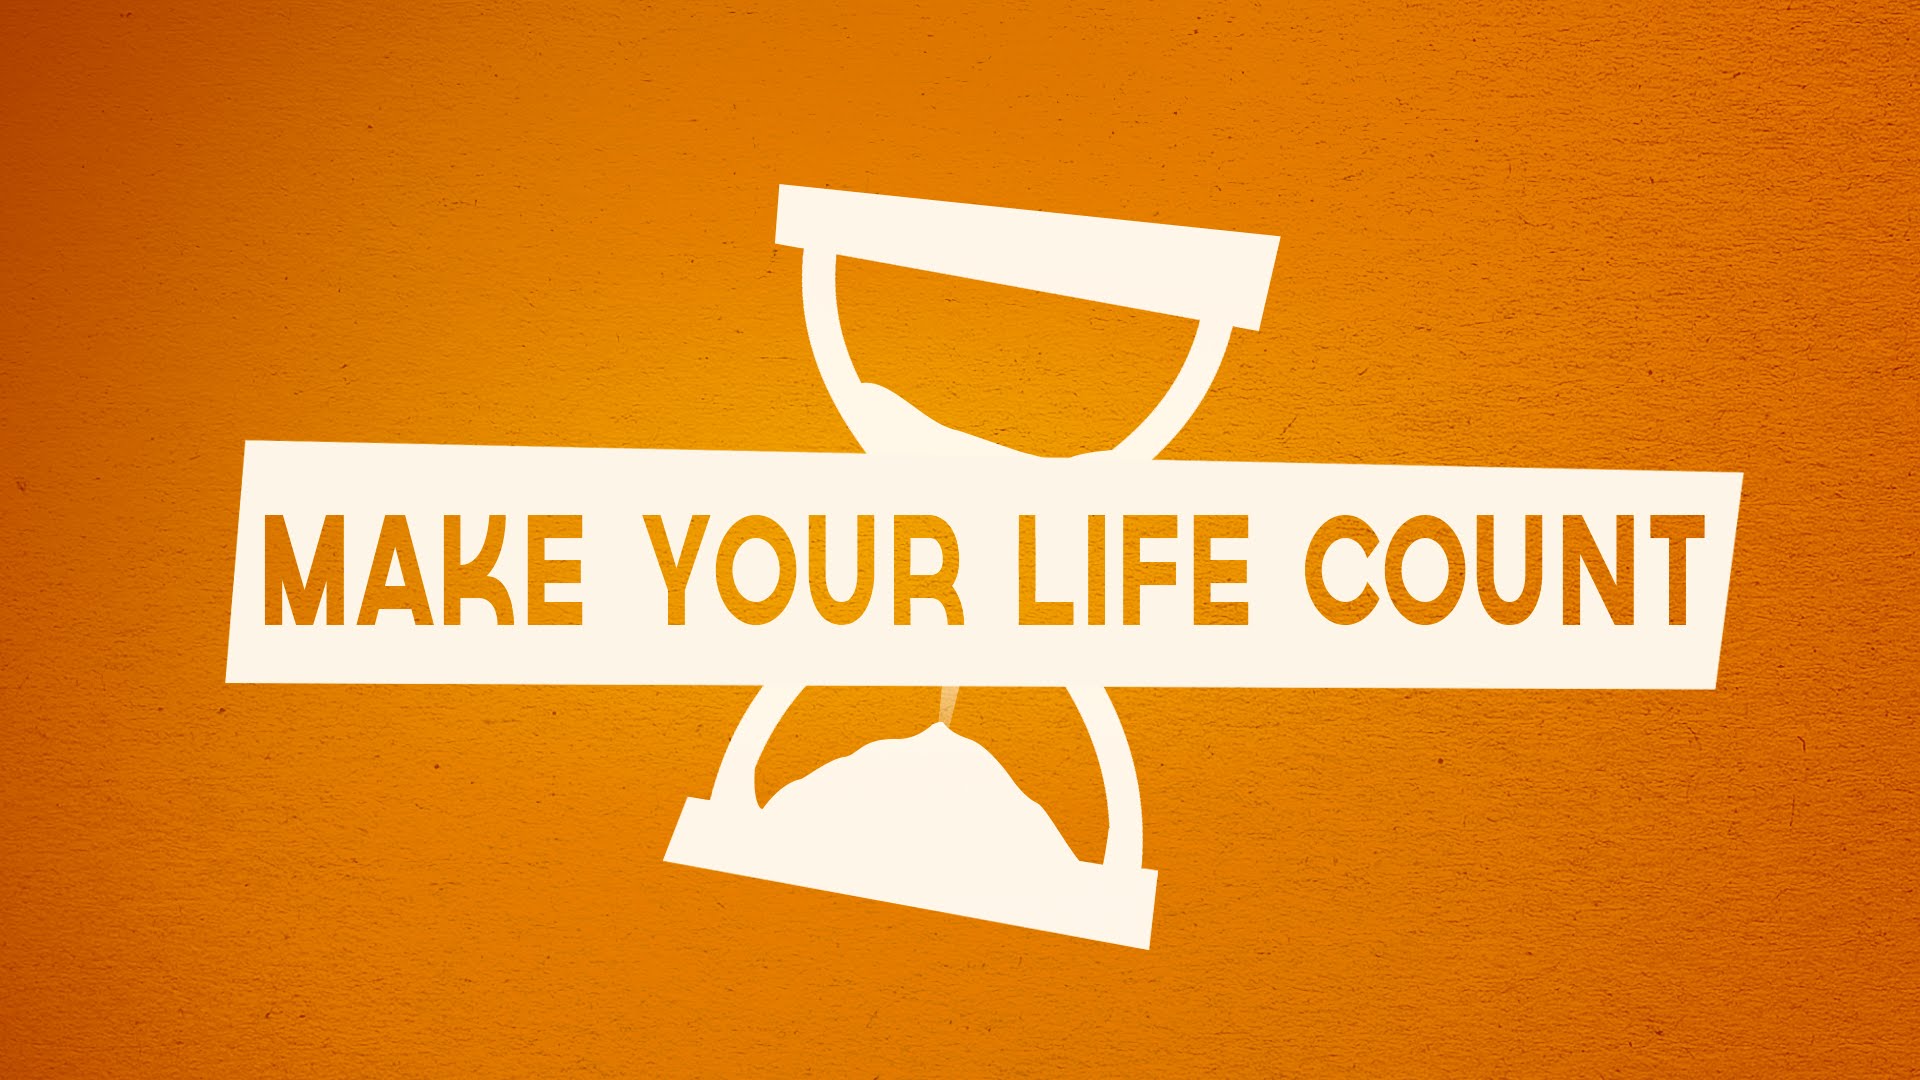 Making Your Life Count (Jan 2011)